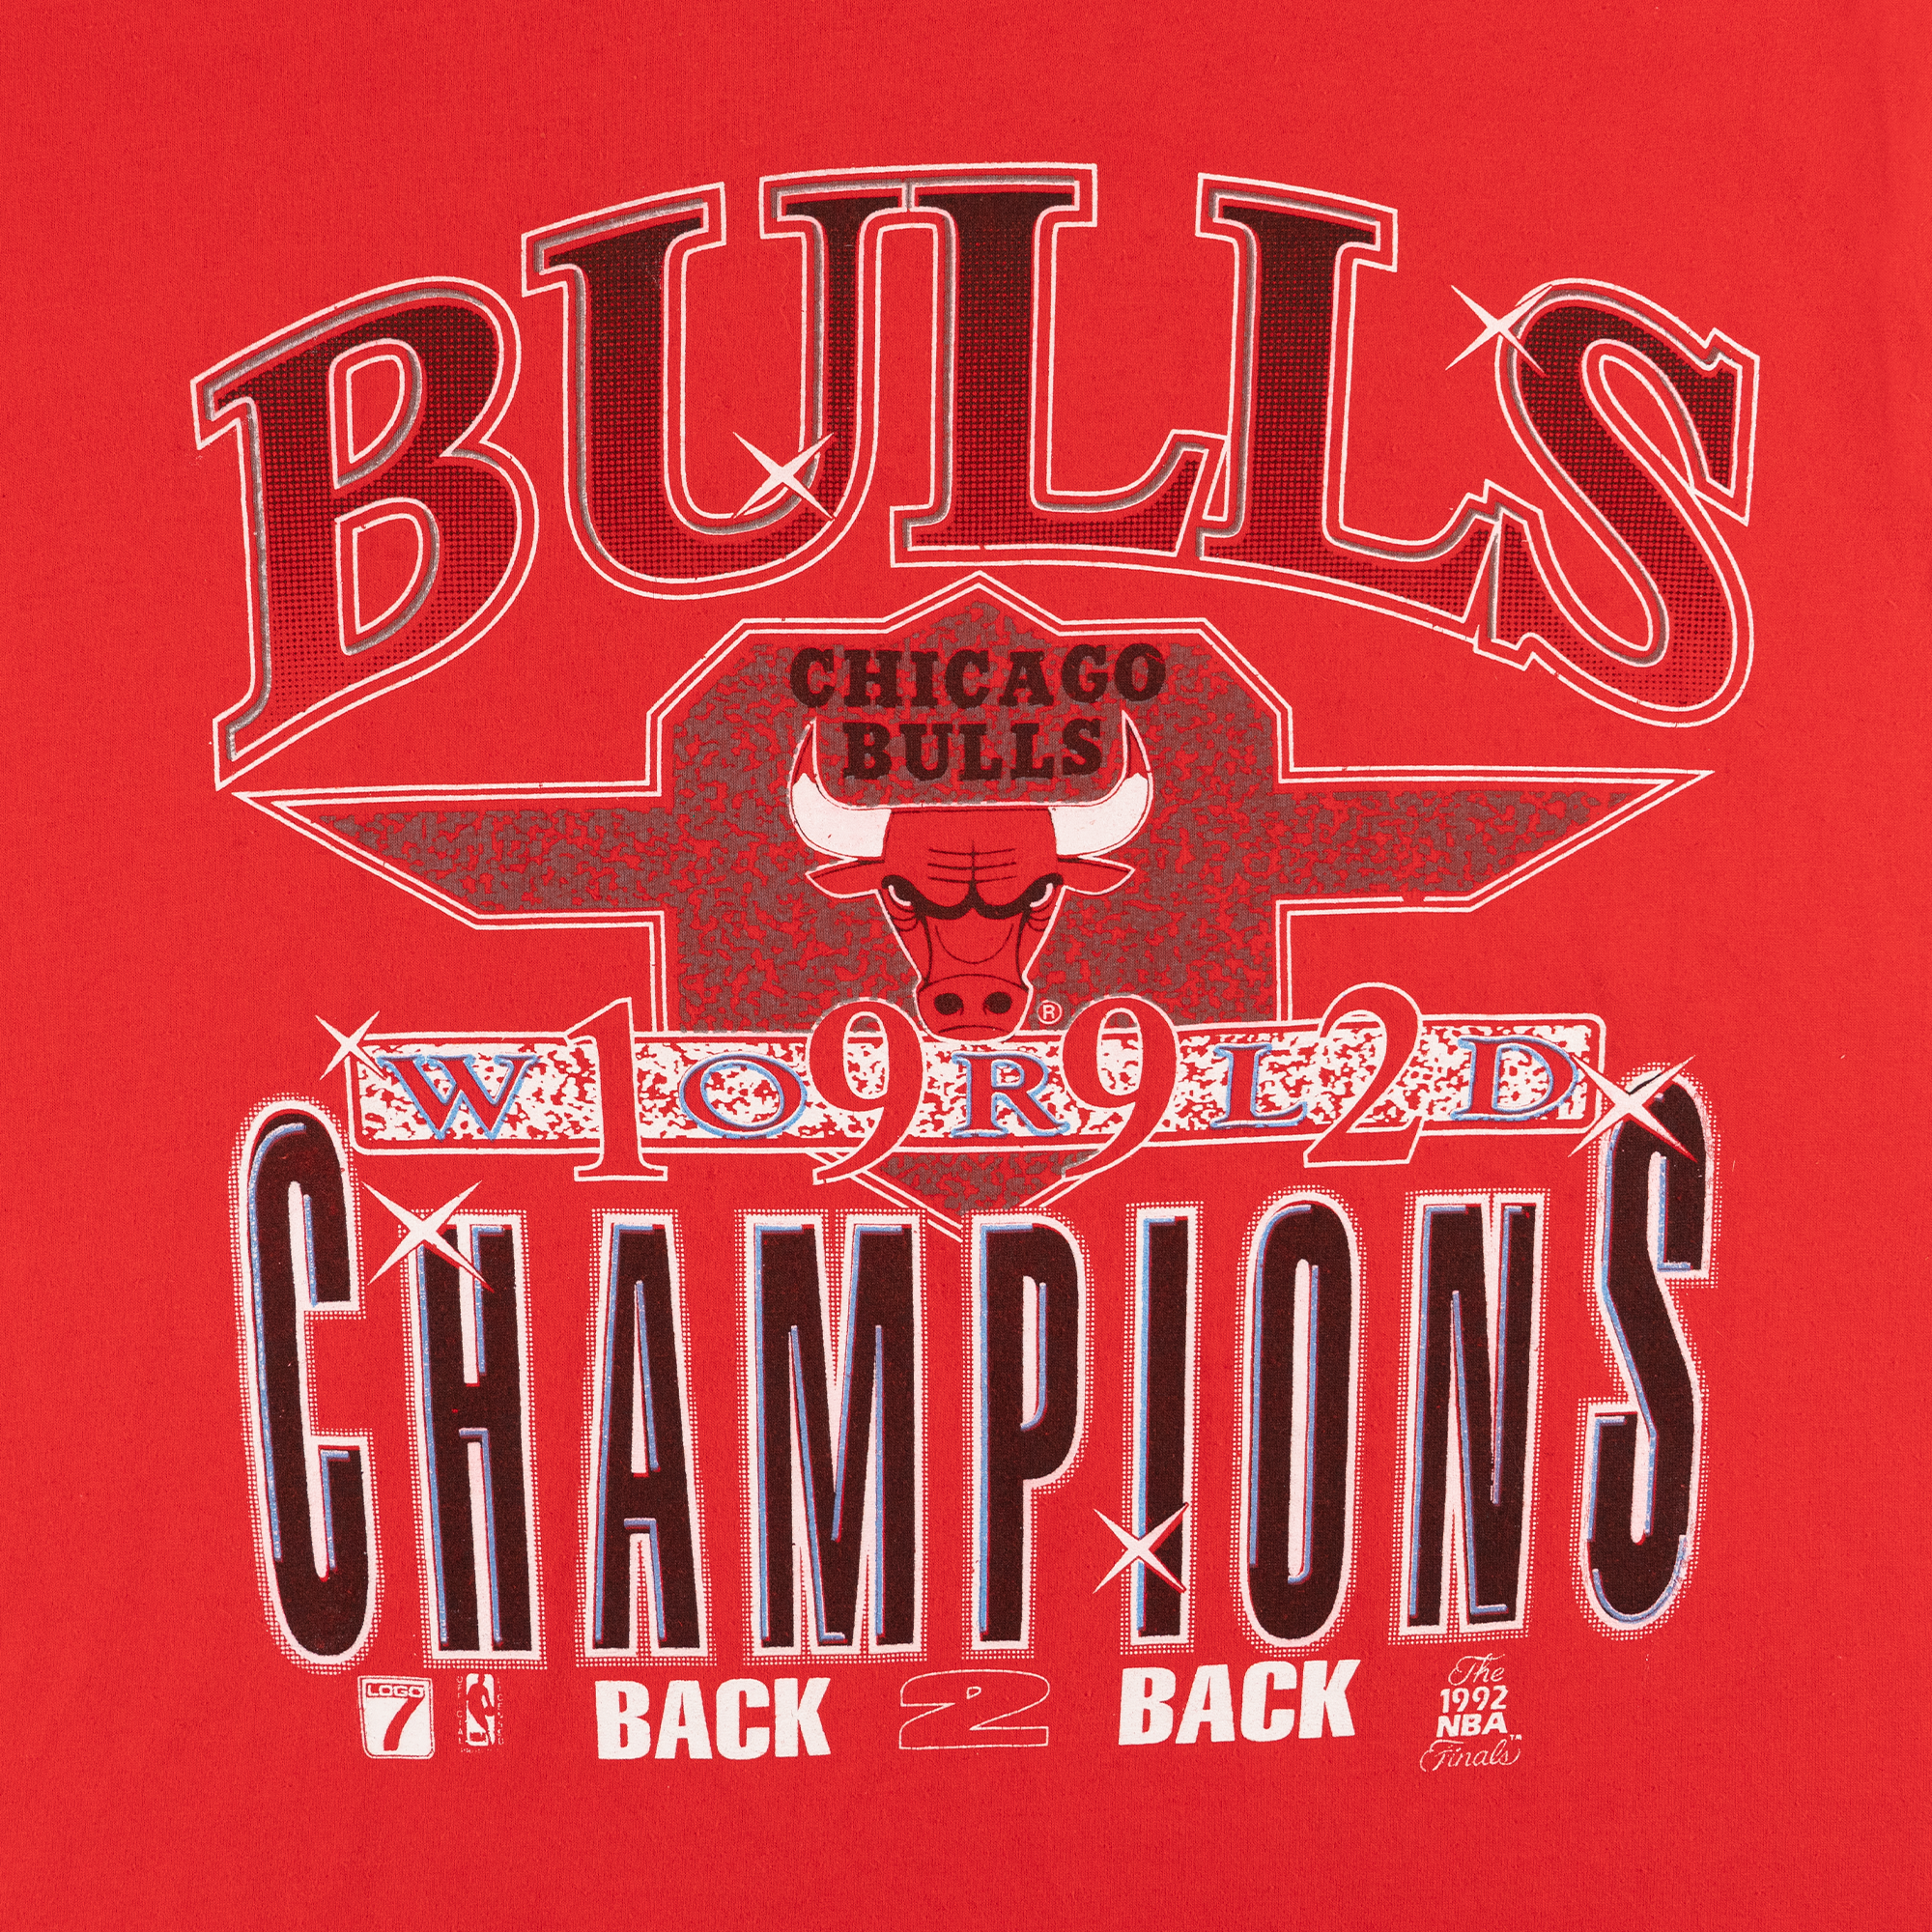 Chicago Bulls 1992 Back2Back World Champs NBA Tee Red-PLUS